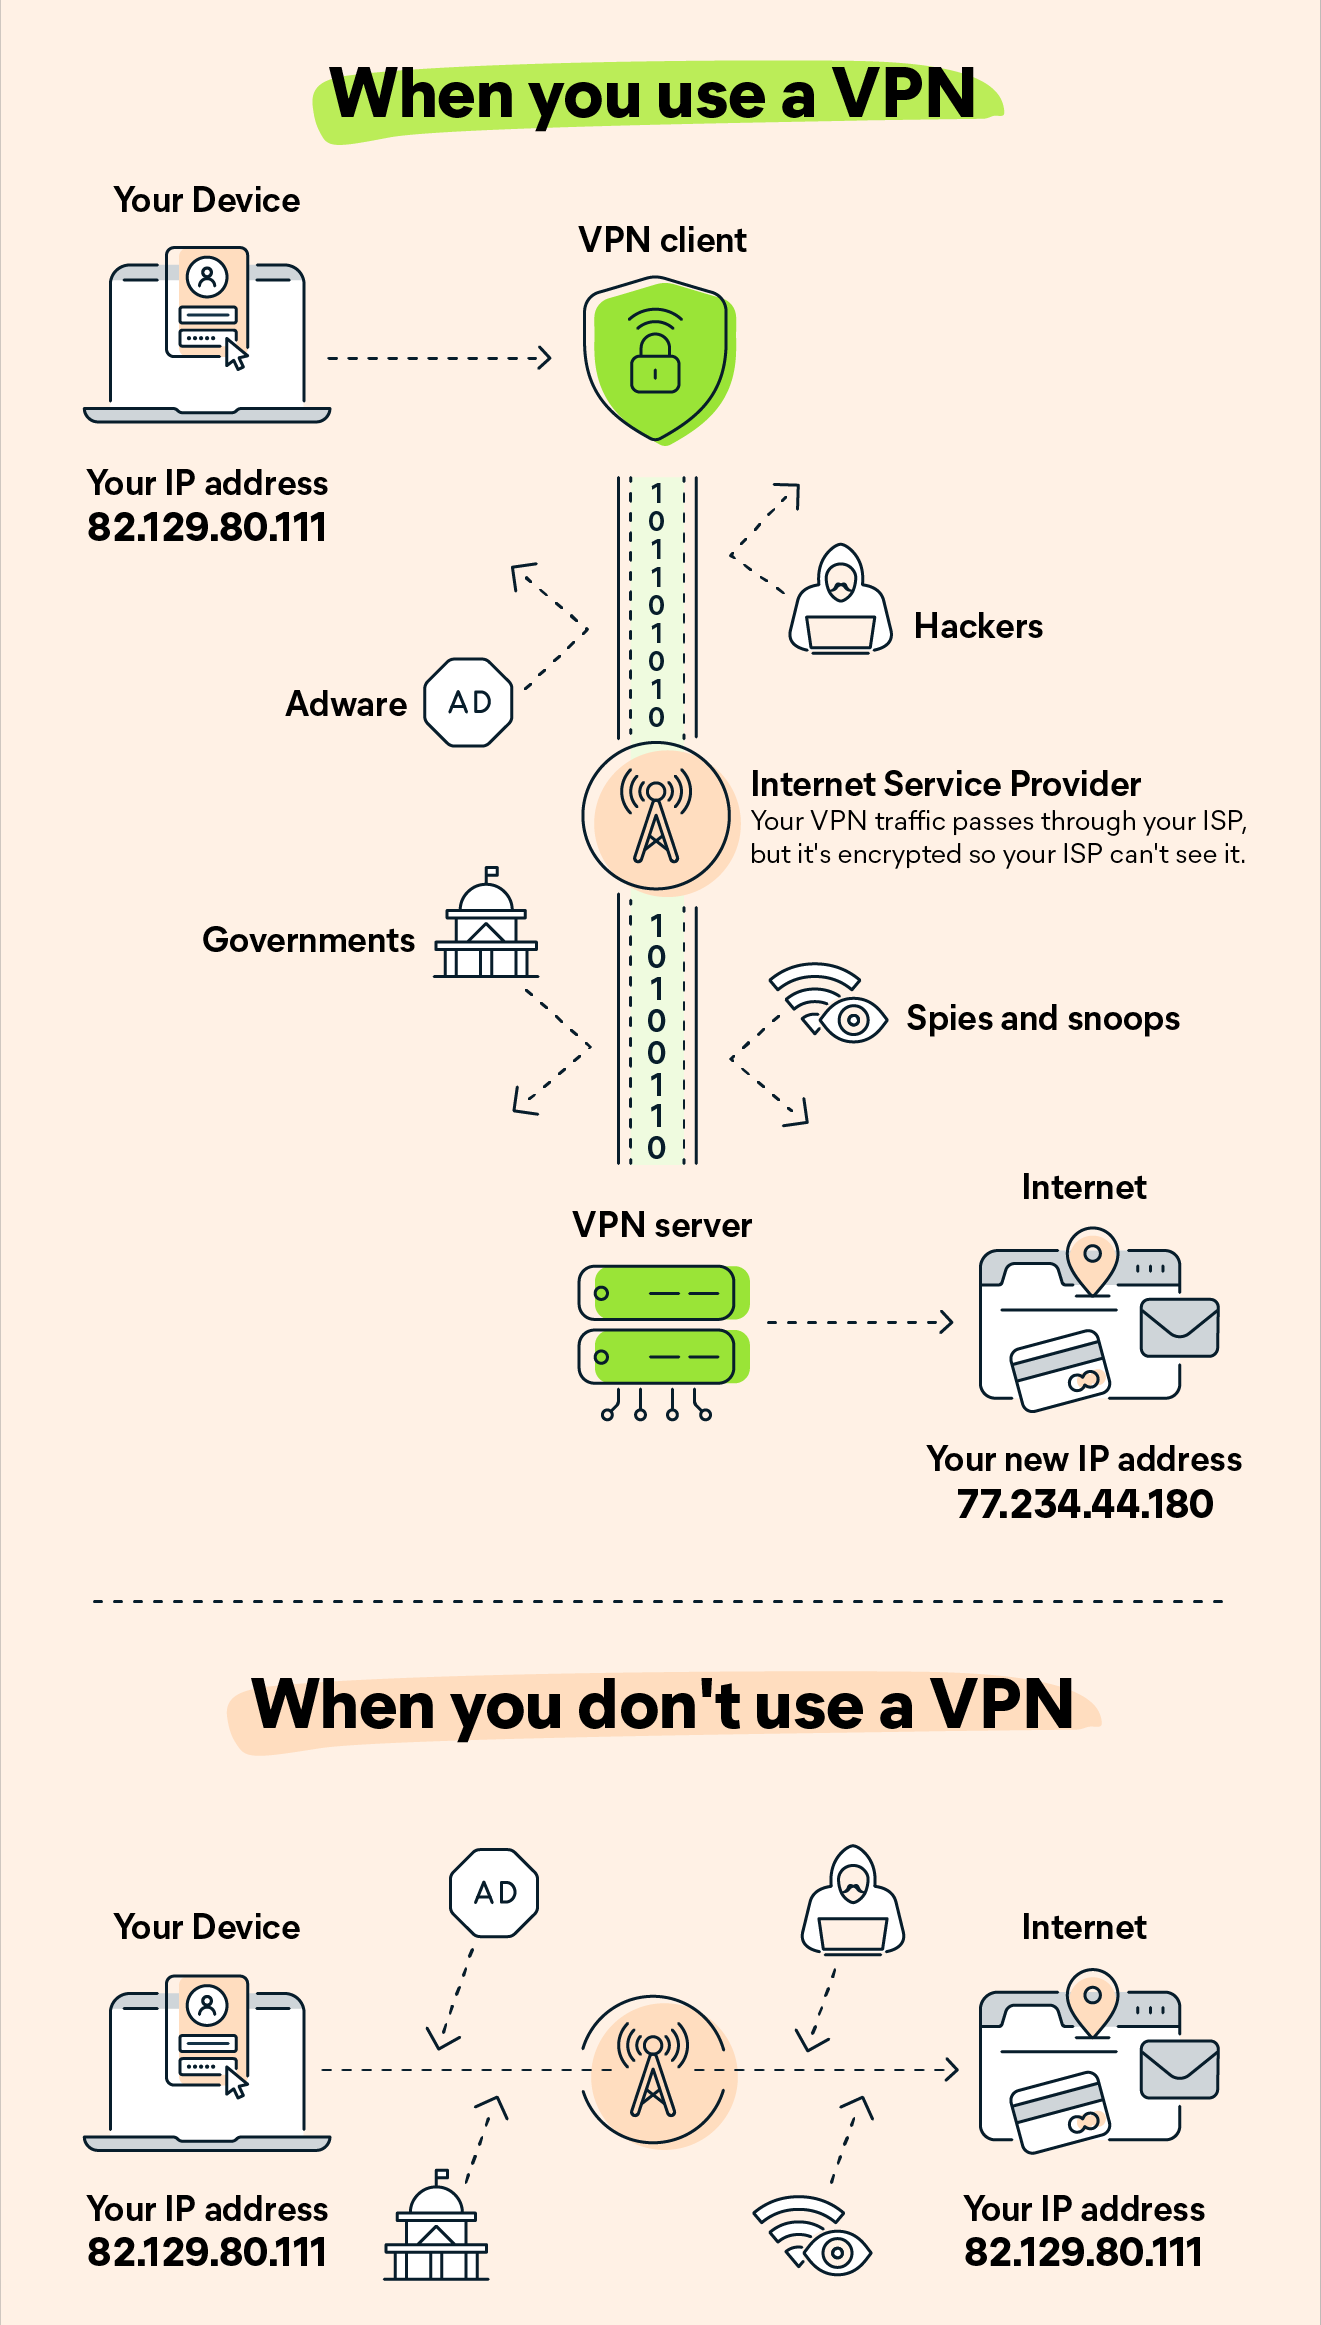 Can VPN be spied on?